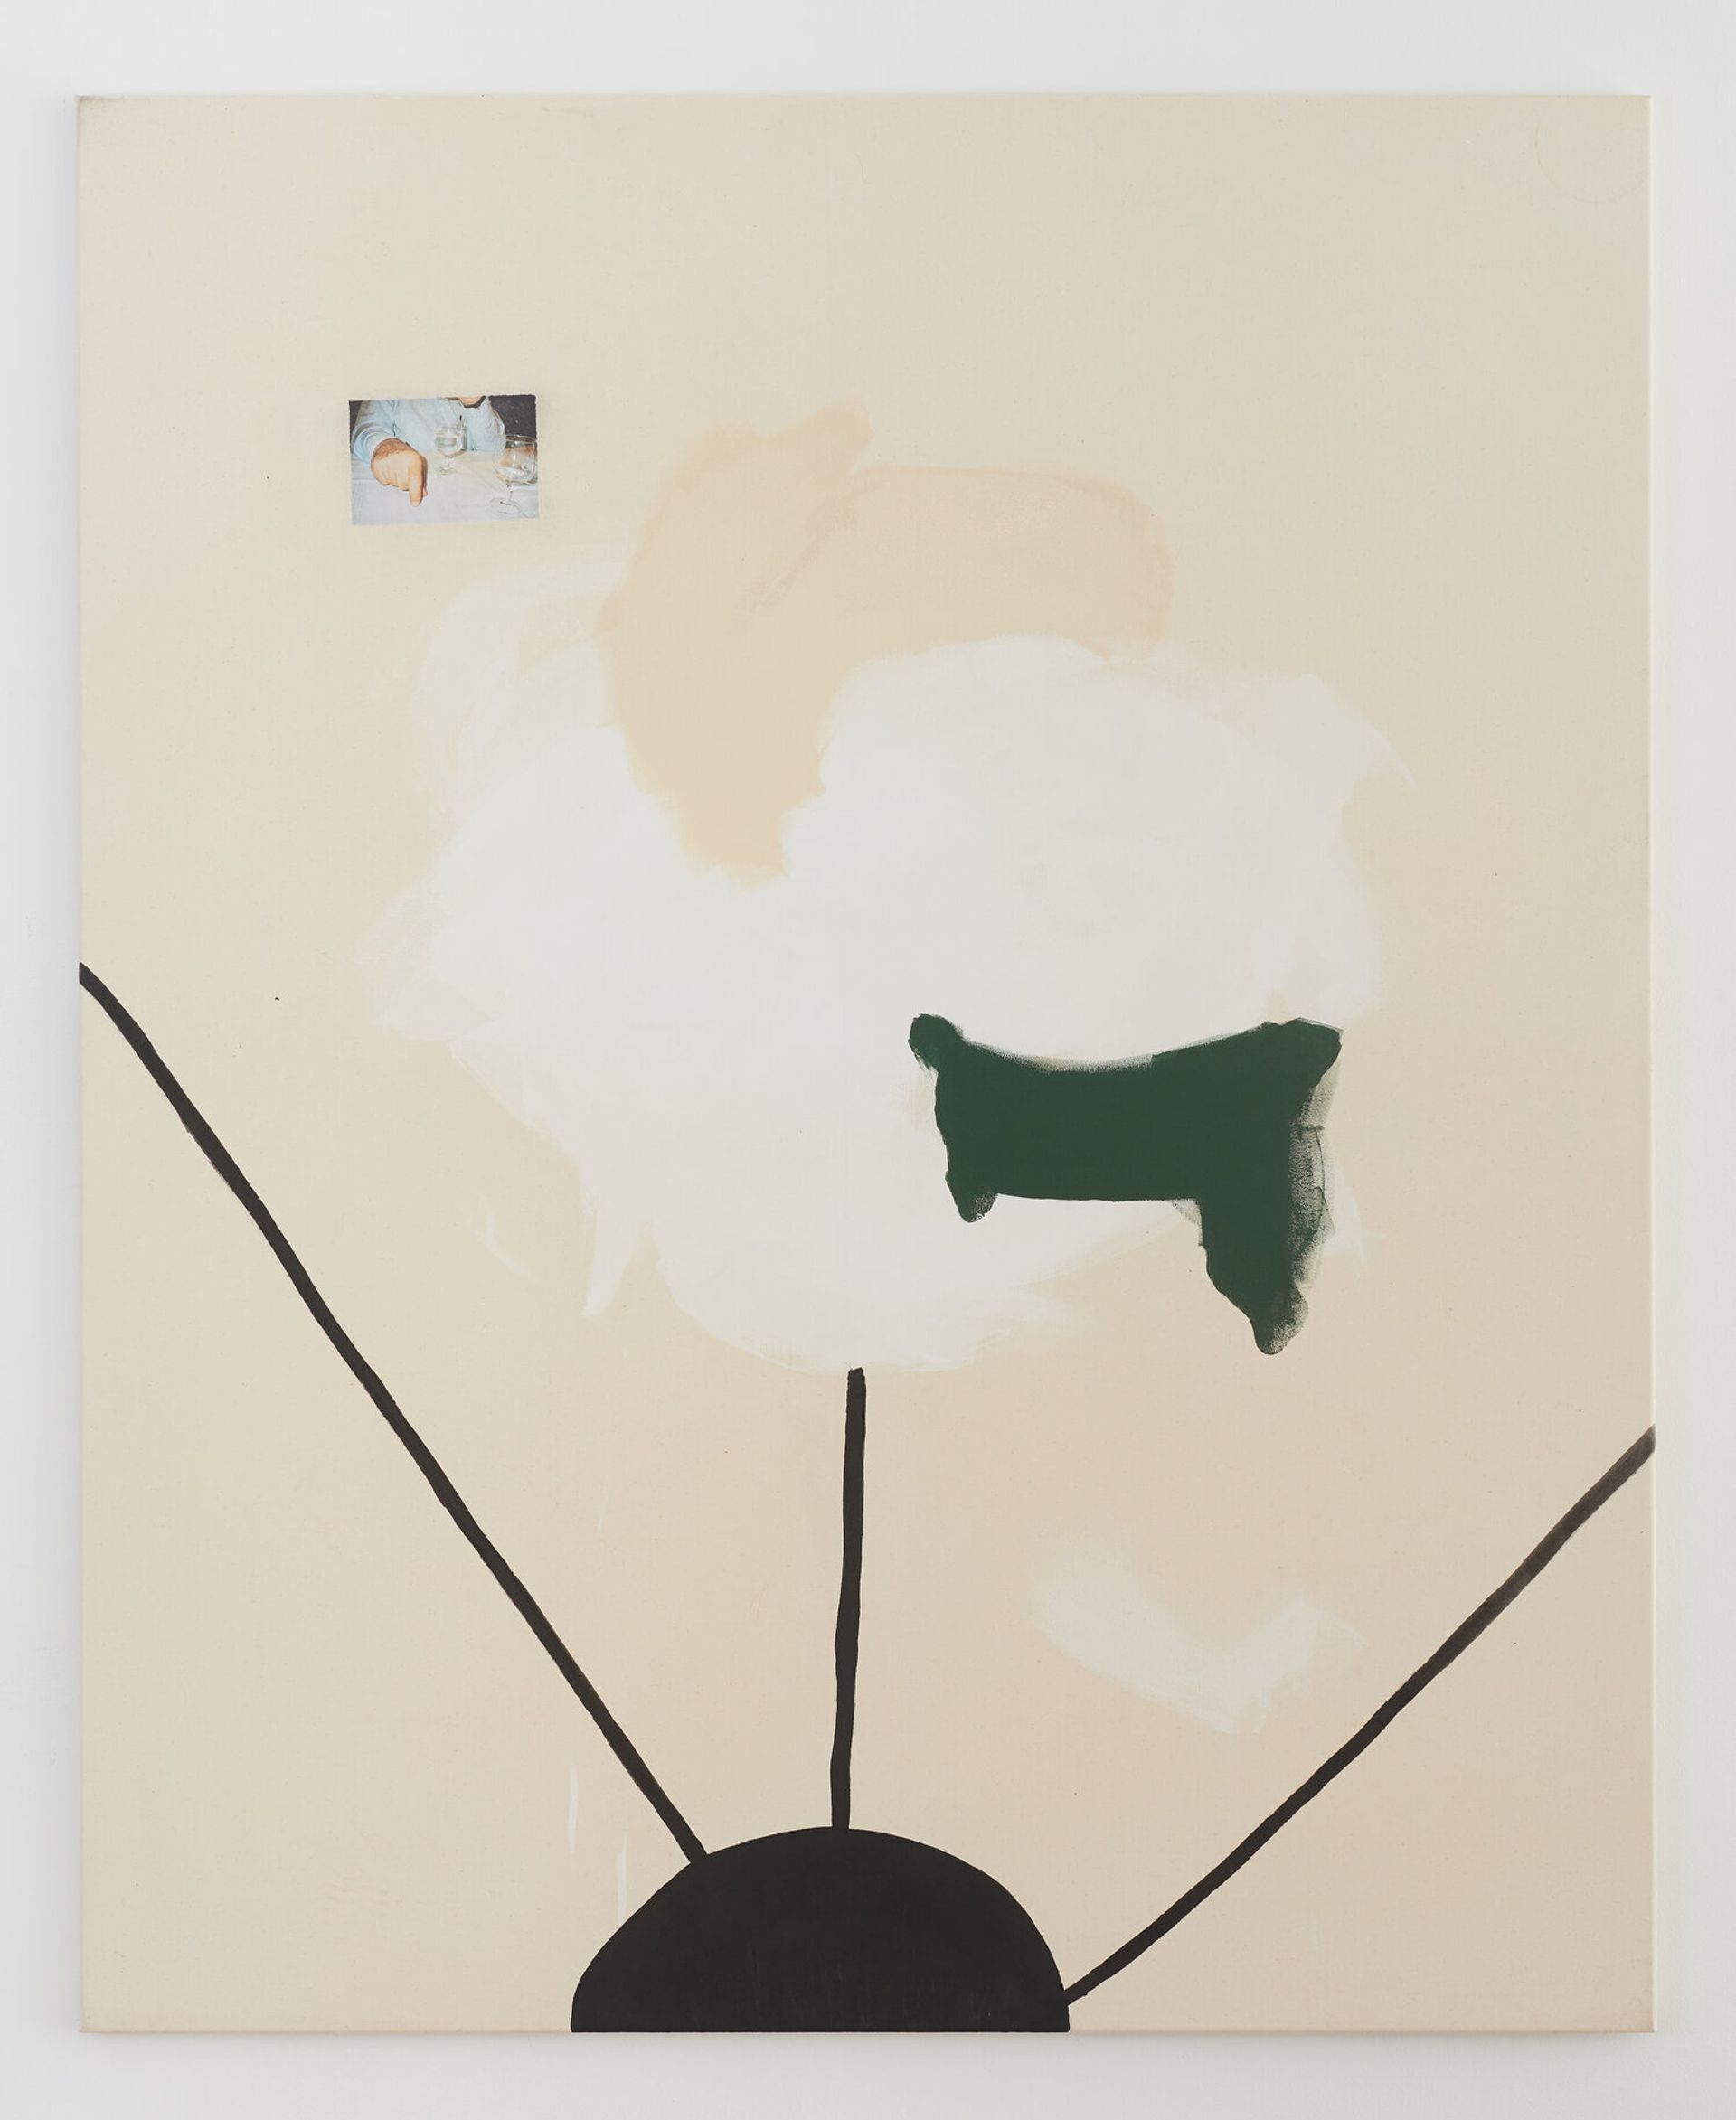 Malte Zenses, pearl, 2018, lacquer, pencil and dirt on canvas, wood, 130 × 160 cm